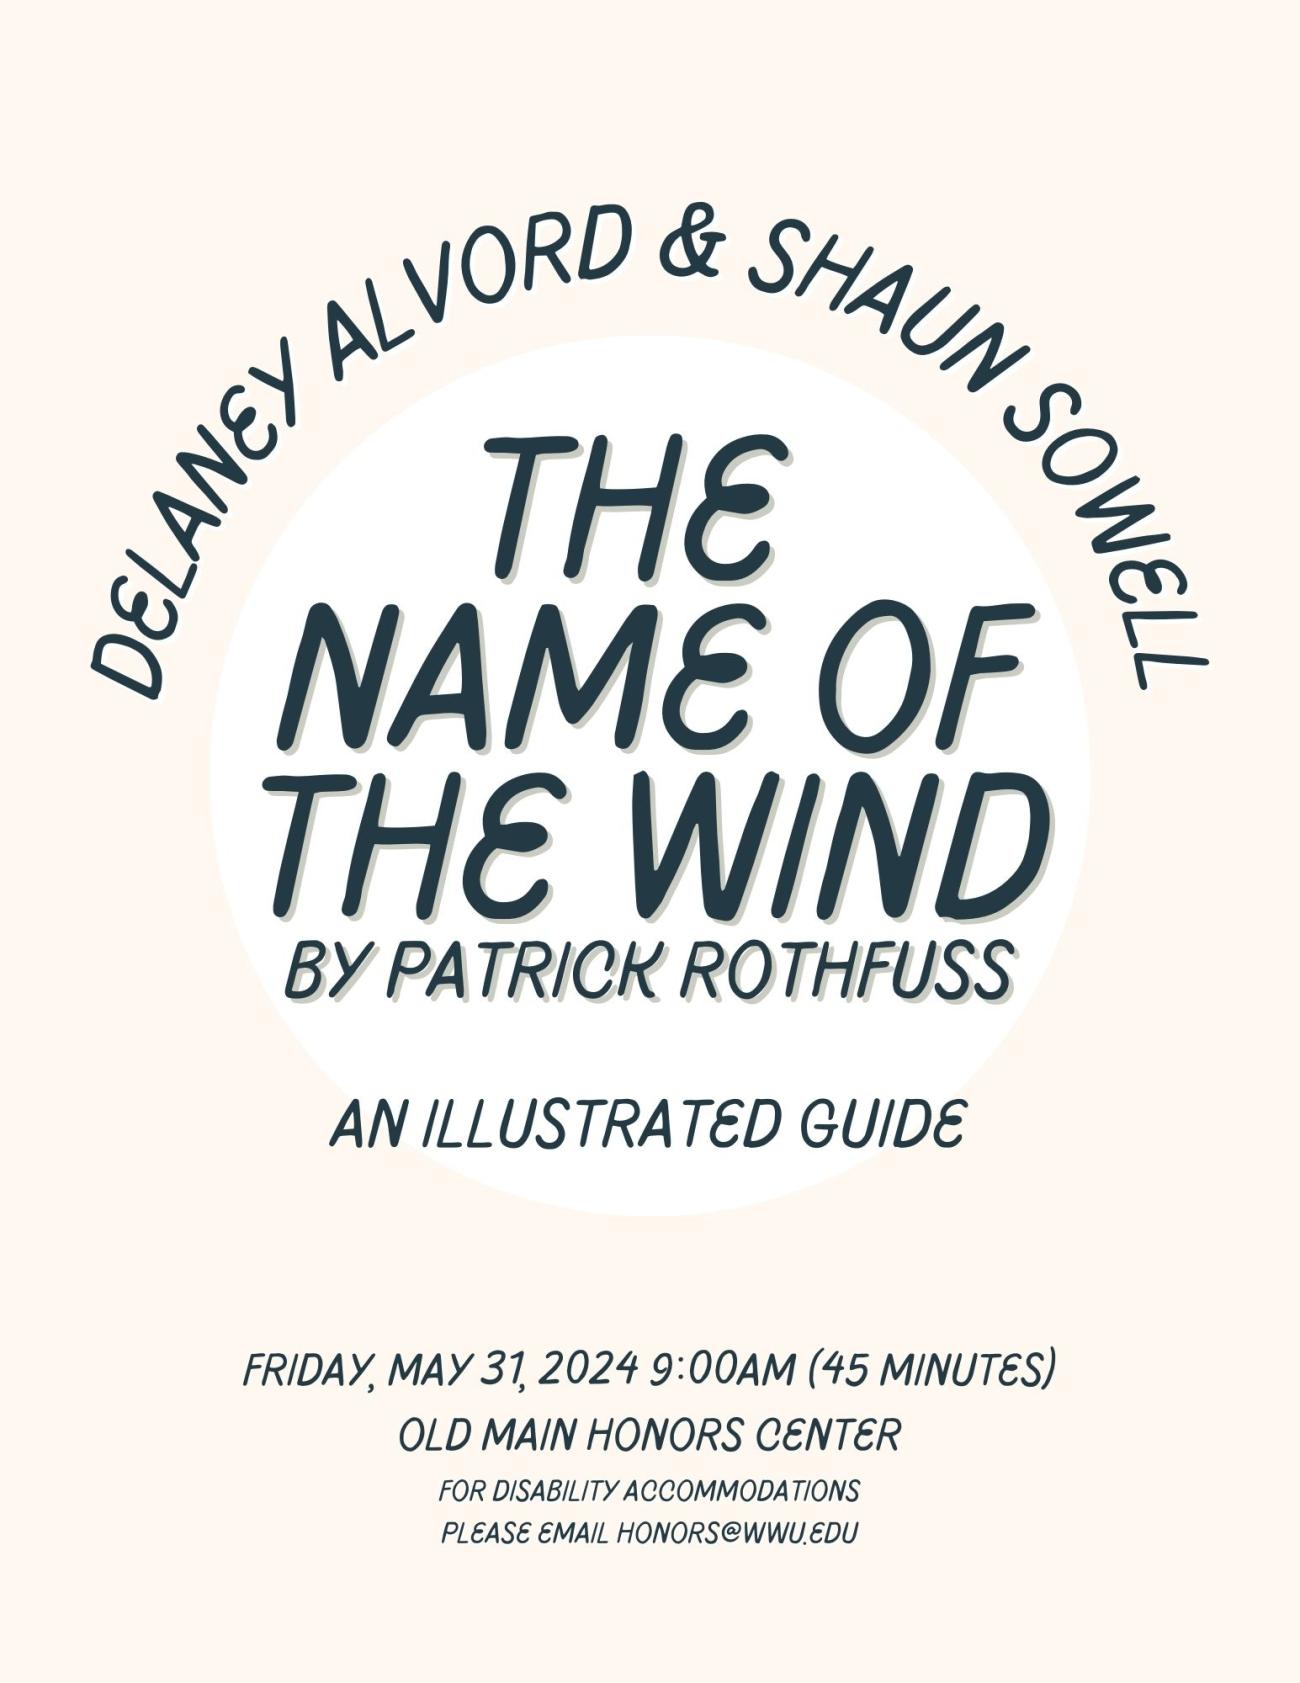 Delaney Alvord and Shaun Sowell present: The Name of the Wind by Patrick Rothfuss: An Illustrated Guide. Friday, May 31, 2024 9:00am (45 minutes). Old Main Honors Center. For disability accommodations please email honors@wwu.edu